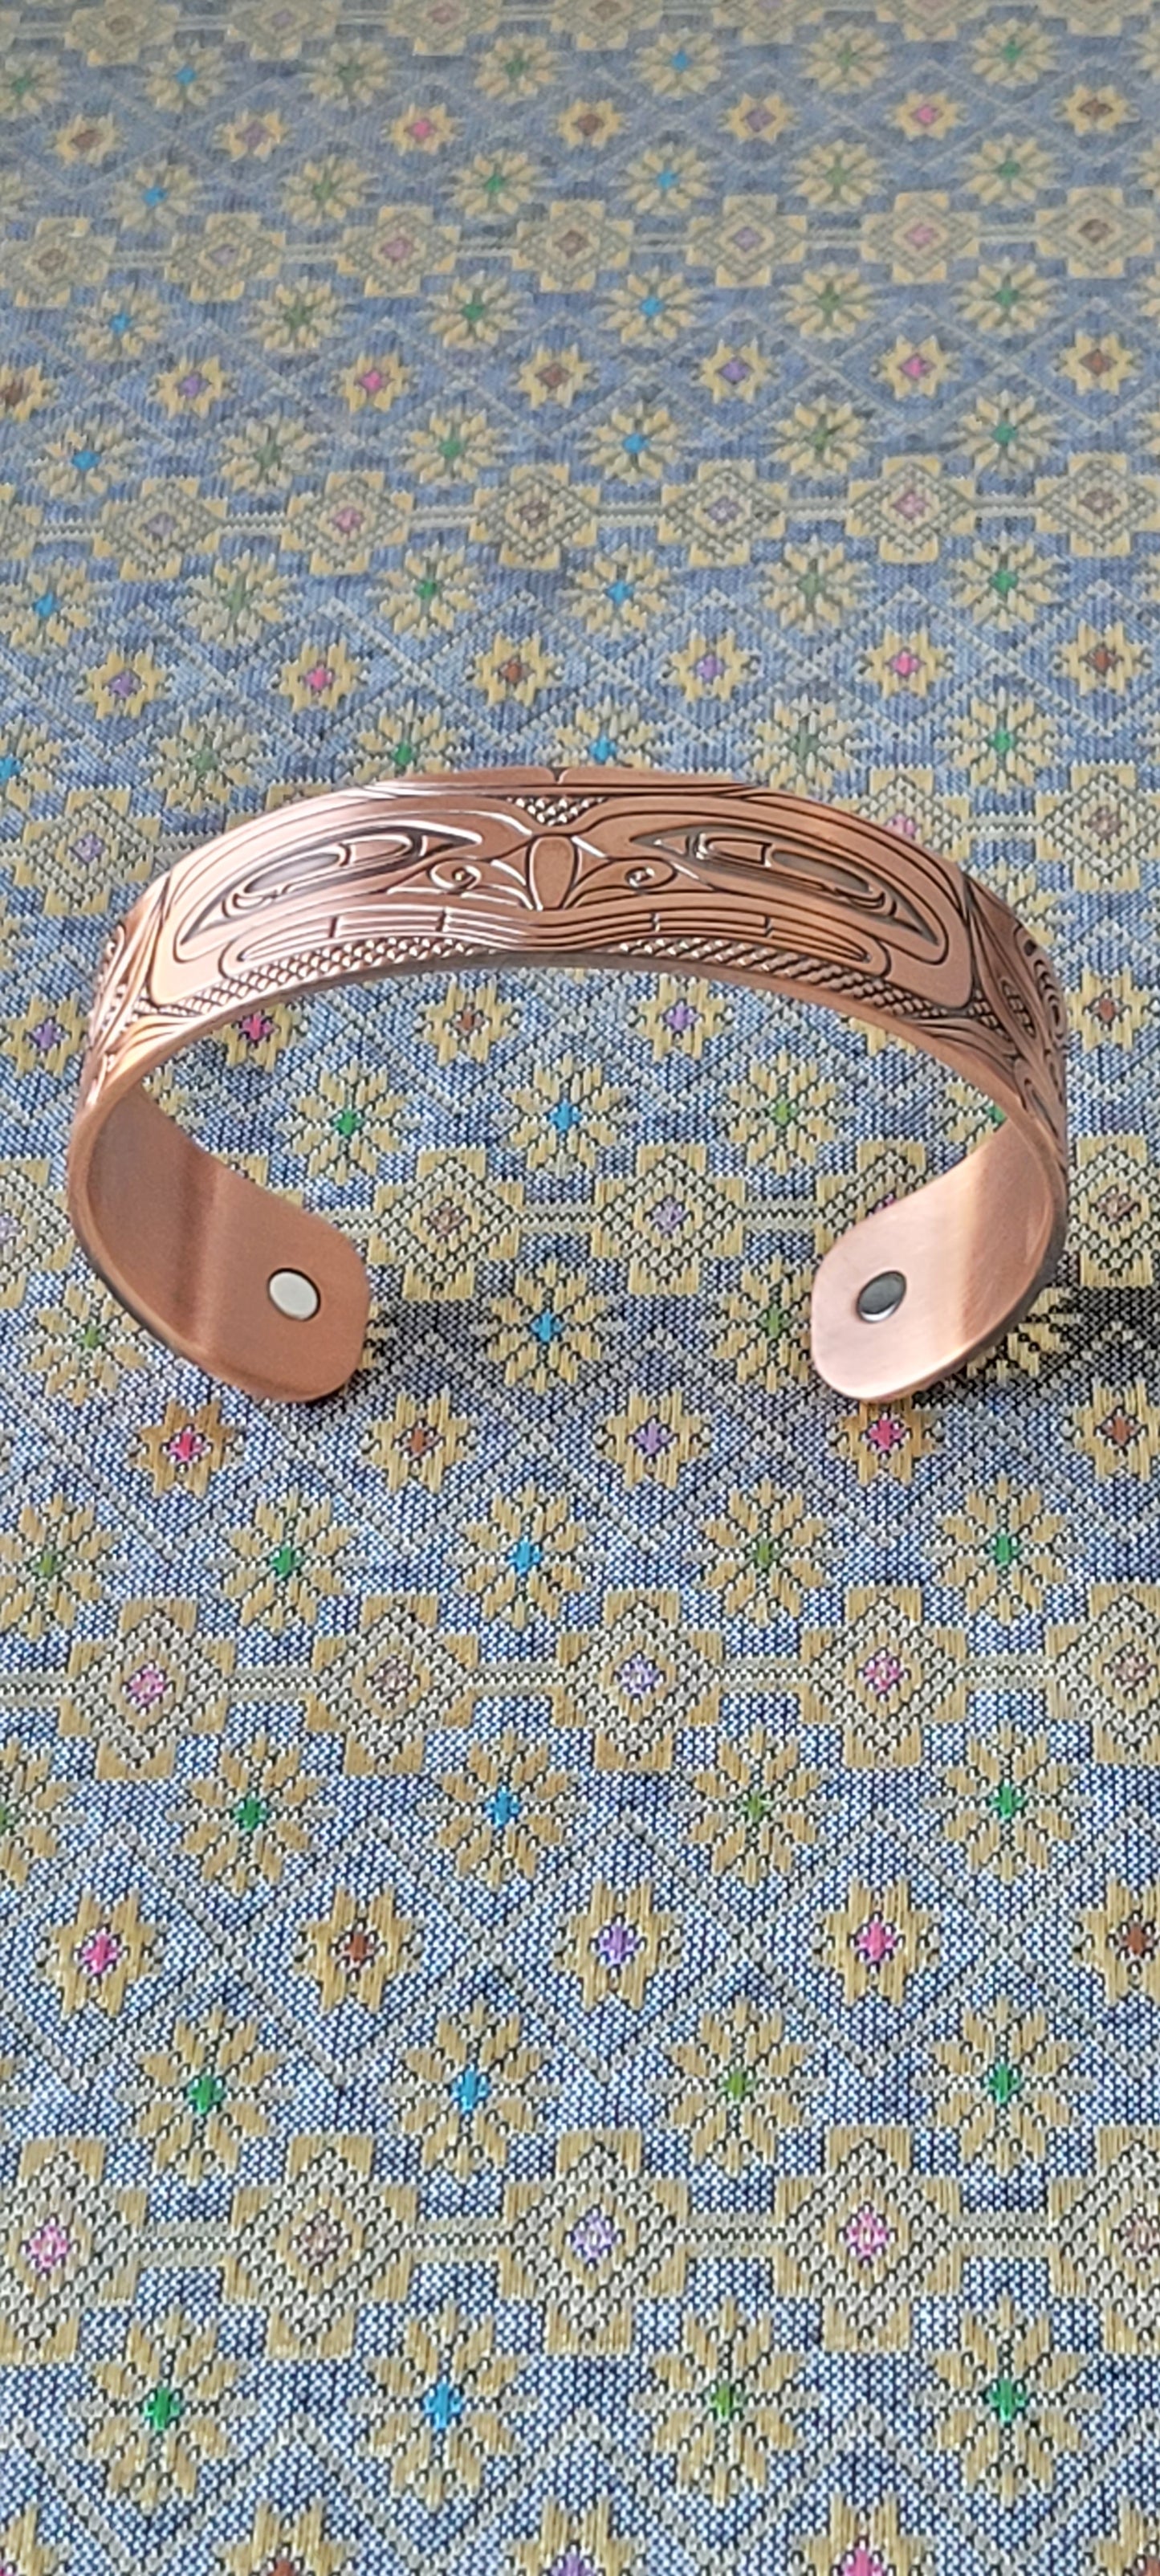 Grizzly Bear Copper Cuff Bracelet by Andrew Williams, Haida